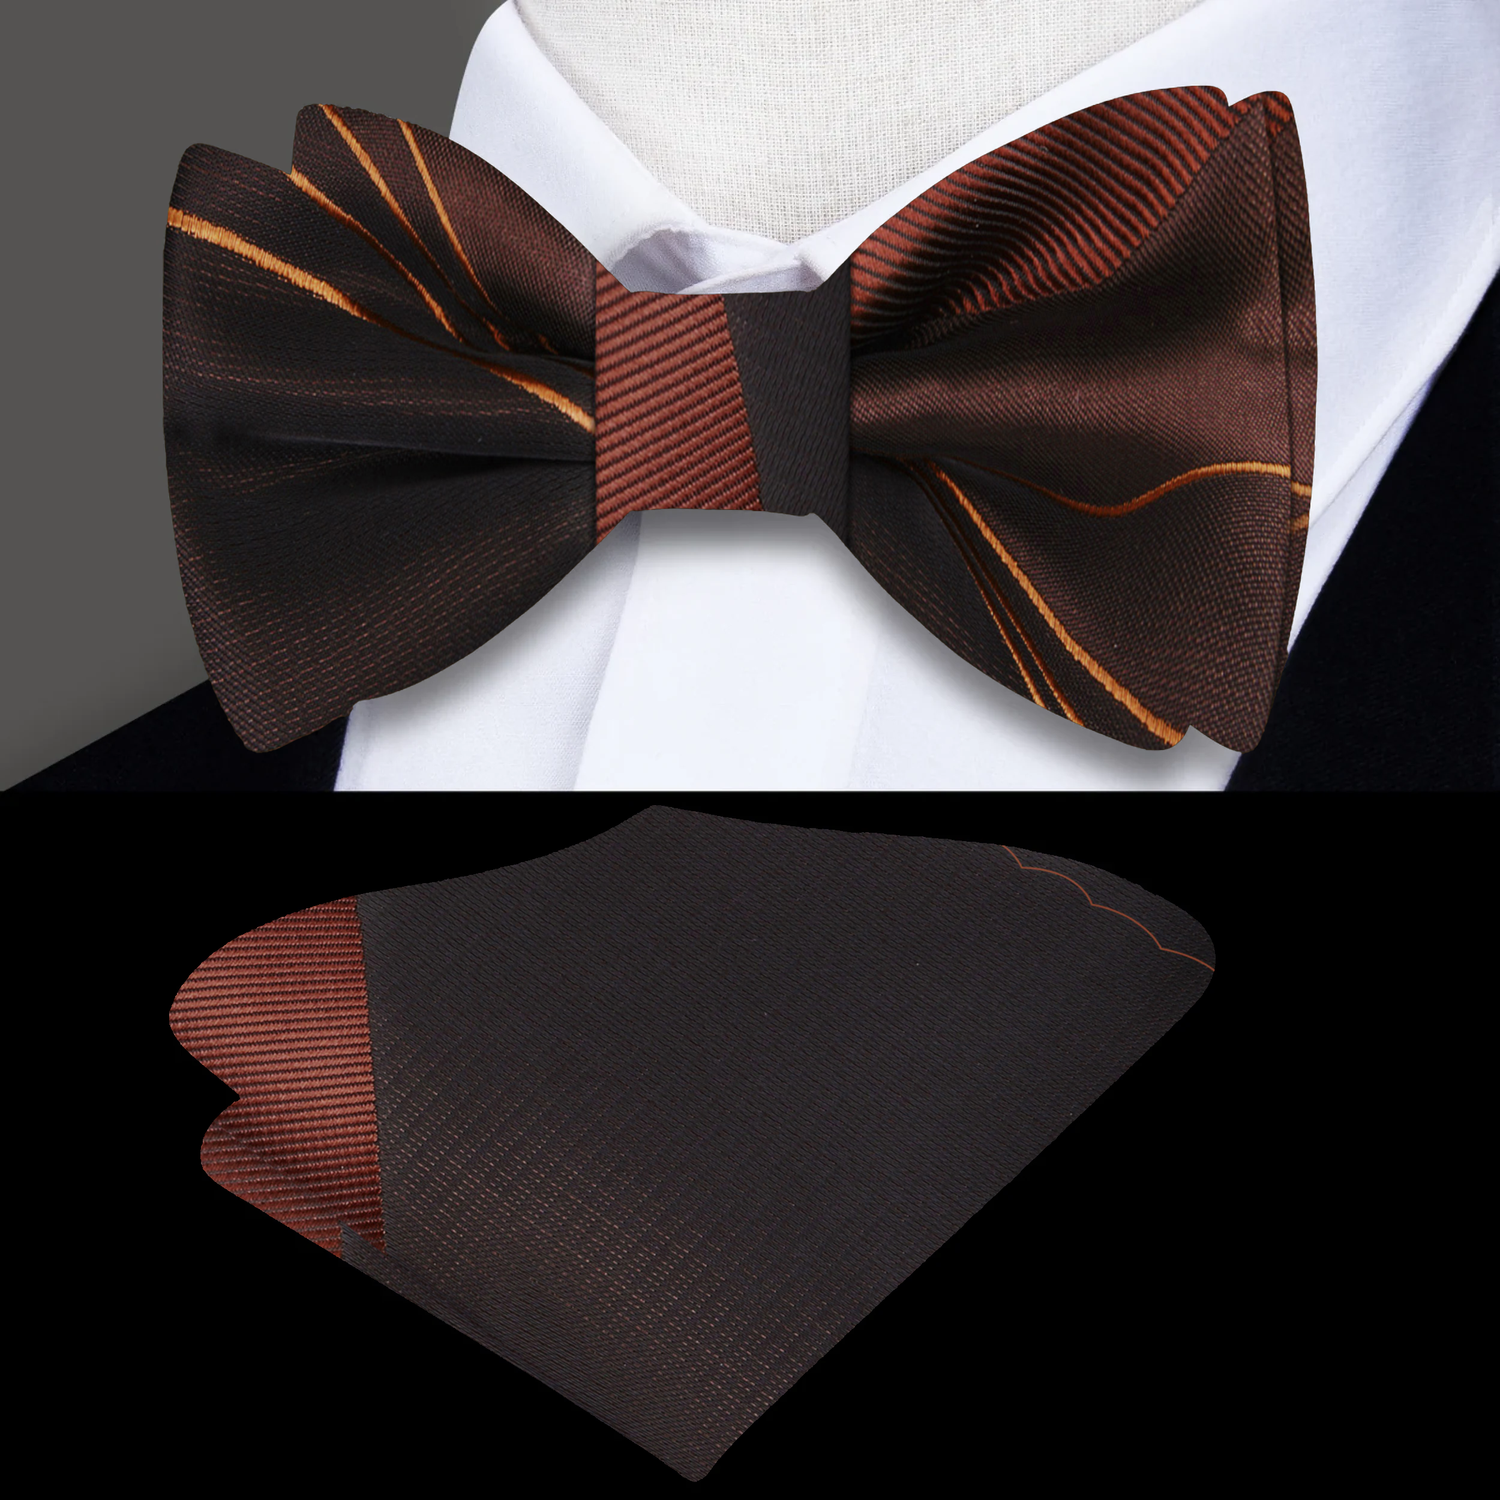 Main: A Chocolate, Brown, Golden Abstract Pattern Silk Self Tie Bow Tie With Matching Pocket Square||Deep Chocolate, Cocoa, Honey